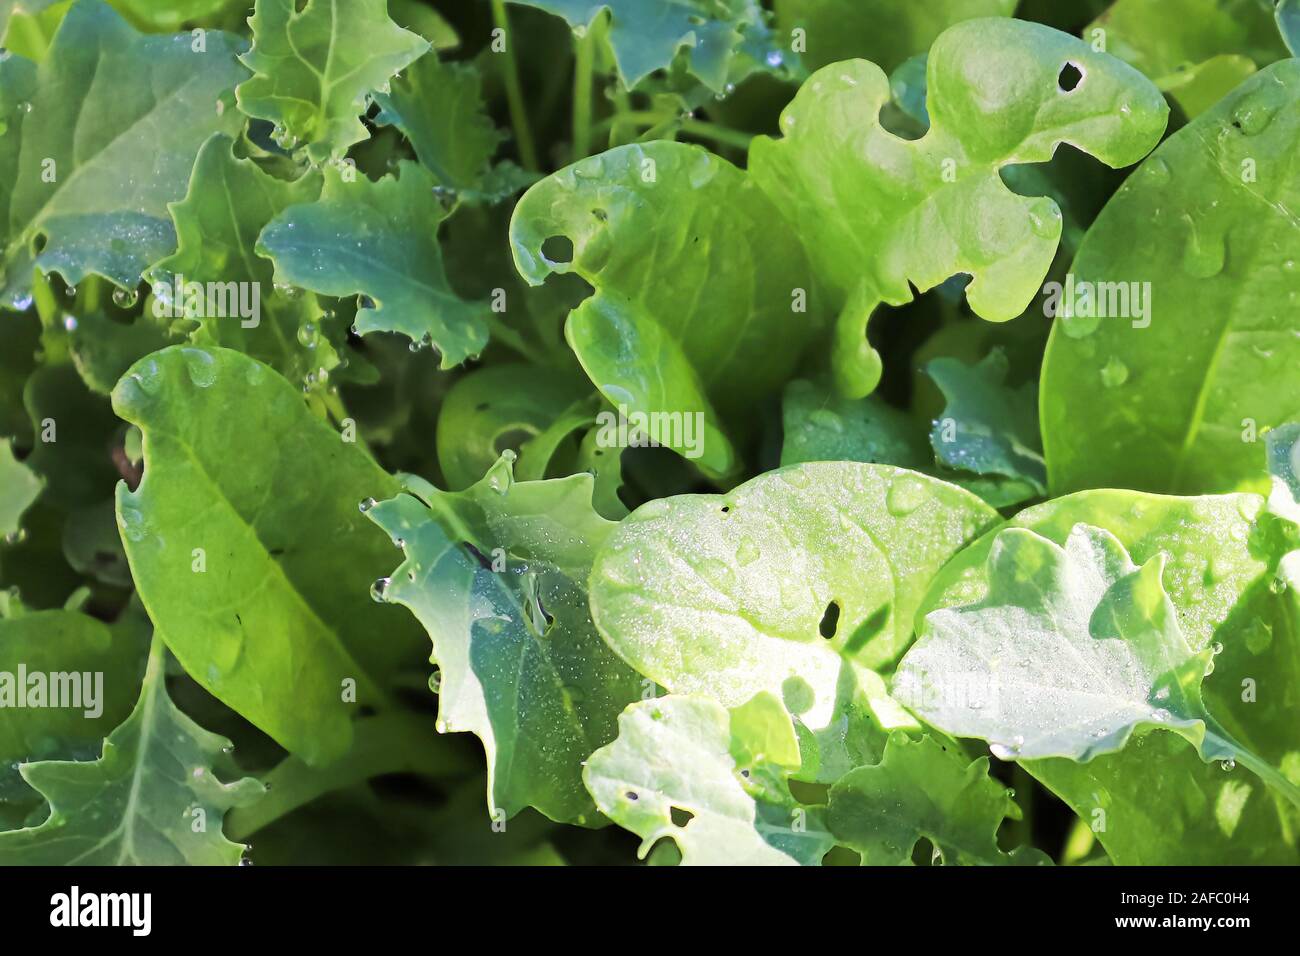 Closeup of mixed baby lettuce greens with water droplets Stock Photo